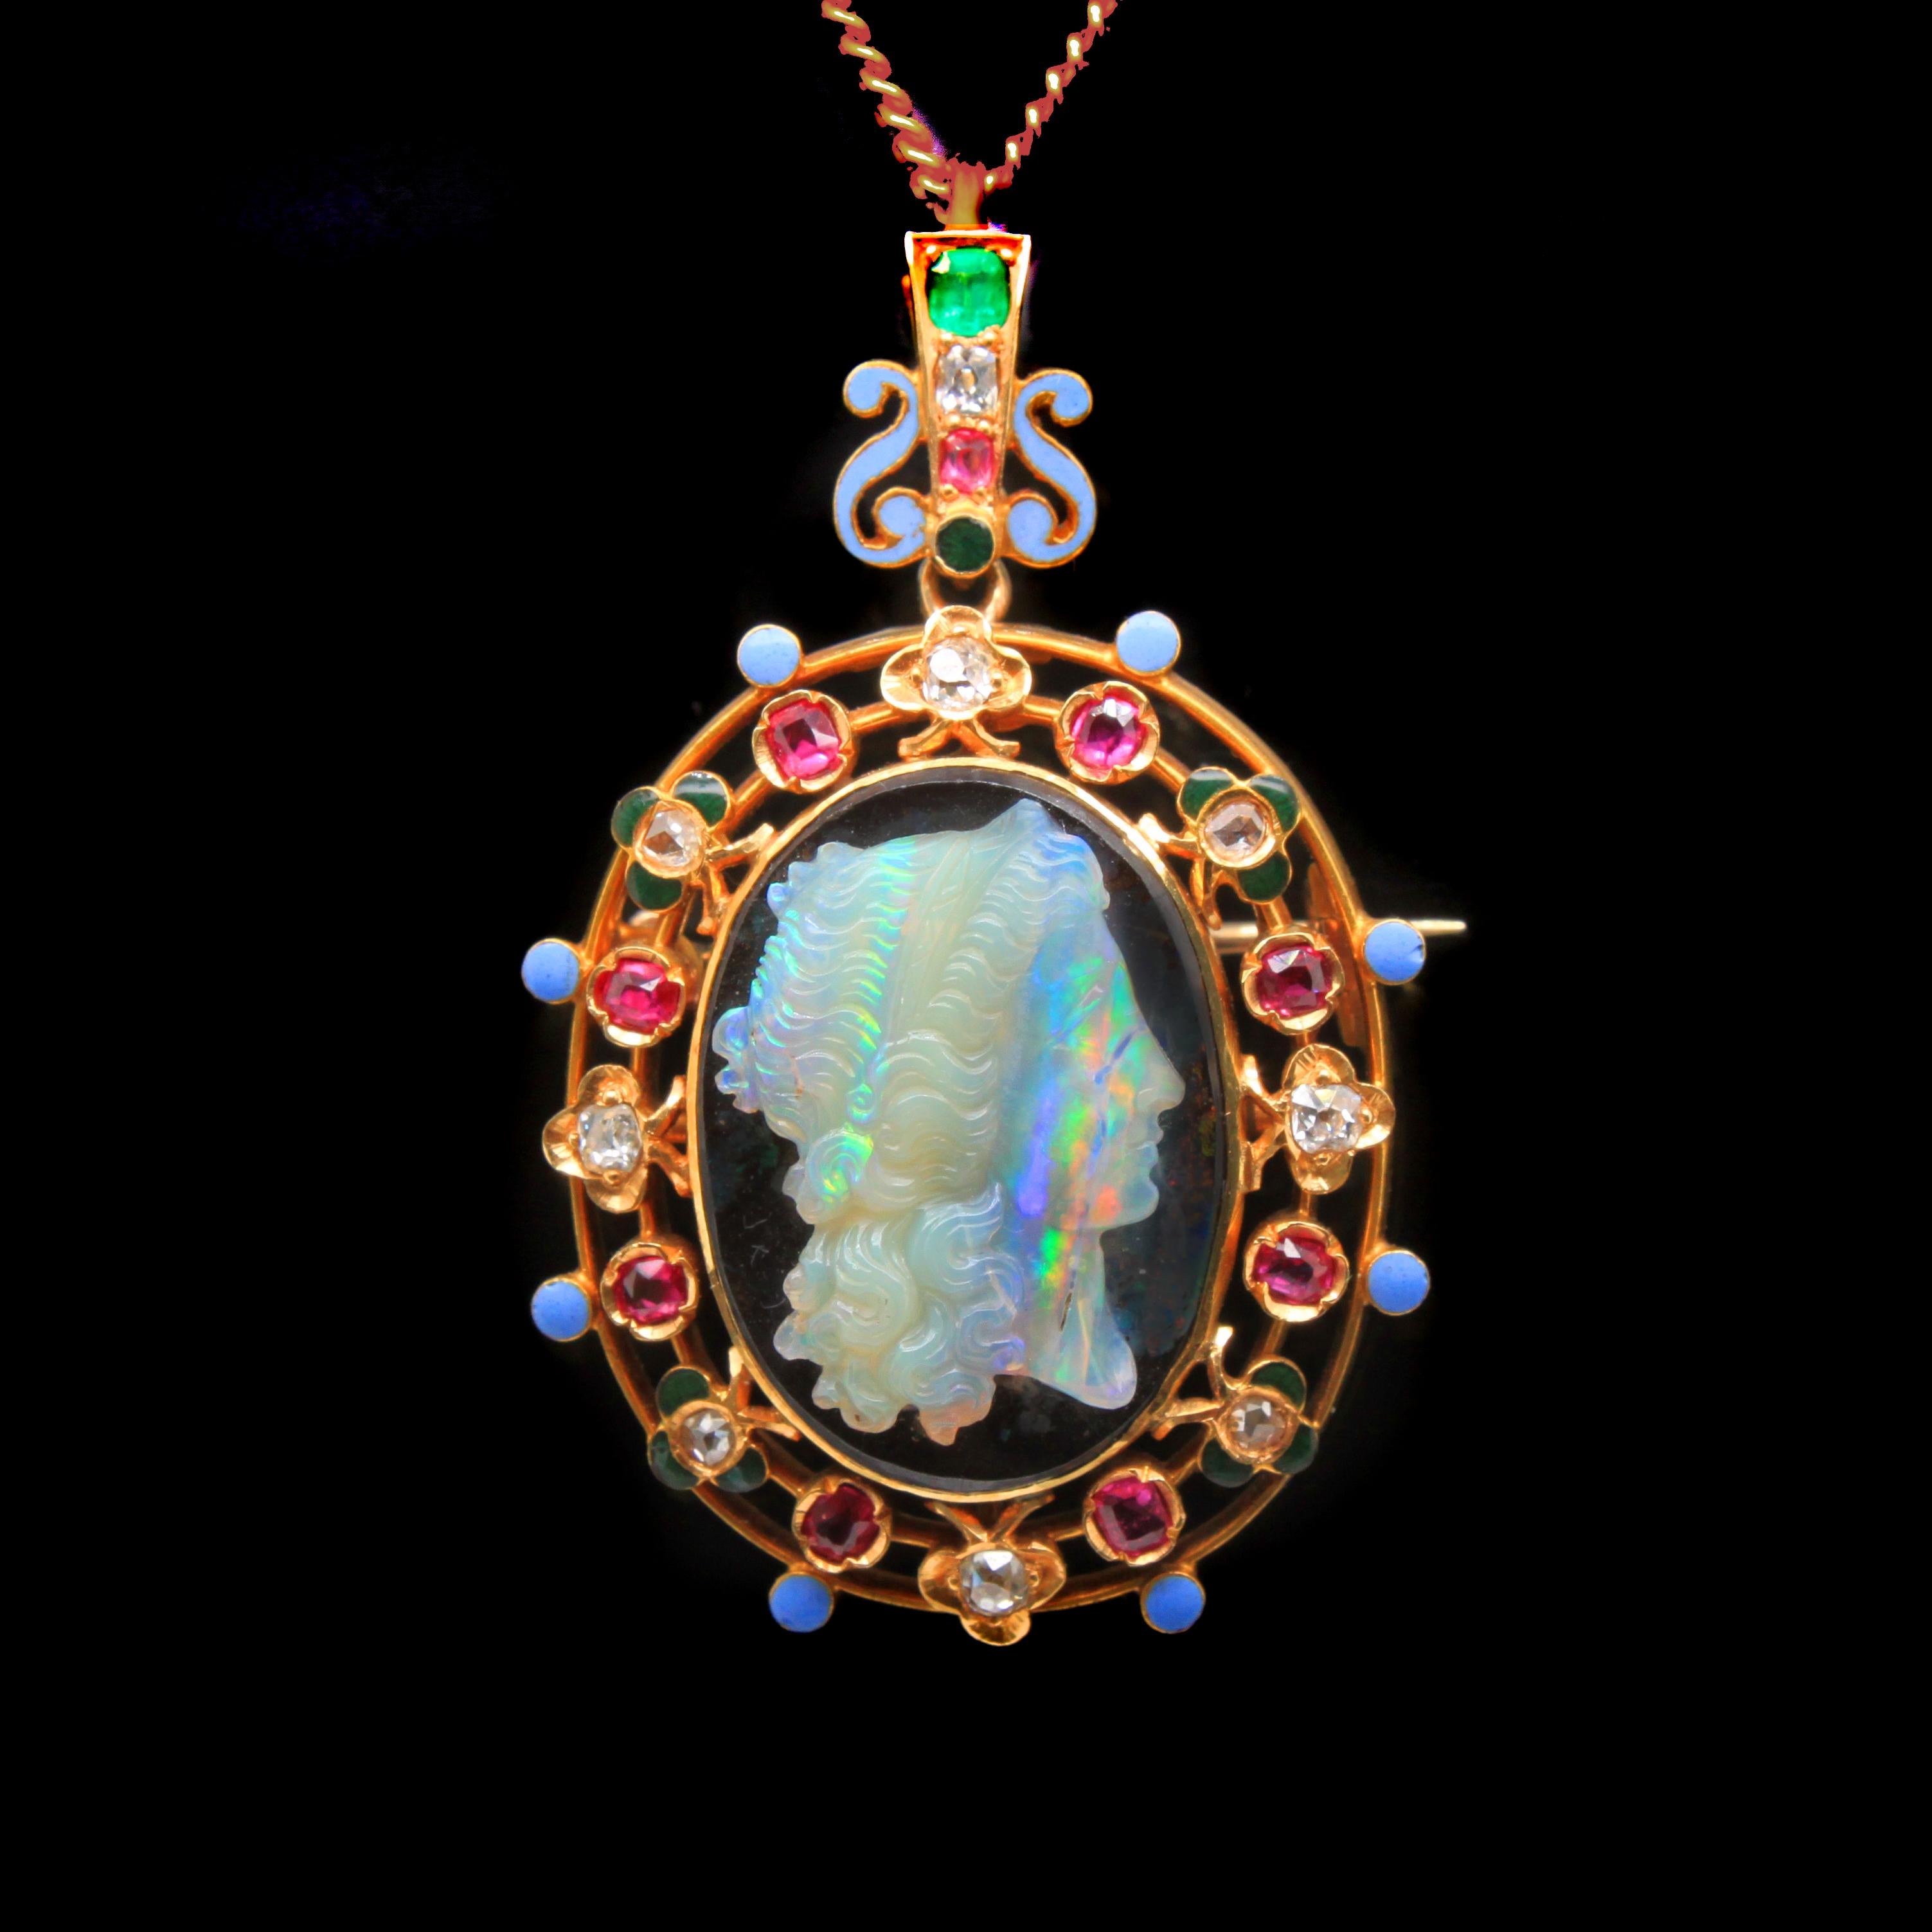 Renaissance Revival Opal Cameo Gem-set and Enamel Brooch Pendant, ca. 1880s

A beautiful and rare carved Opal cameo brooch pendant depicting Aphrodite? in a relief (attributed to master cutter Wilhelm Schmidt from Idar-Oberstein, Germany),